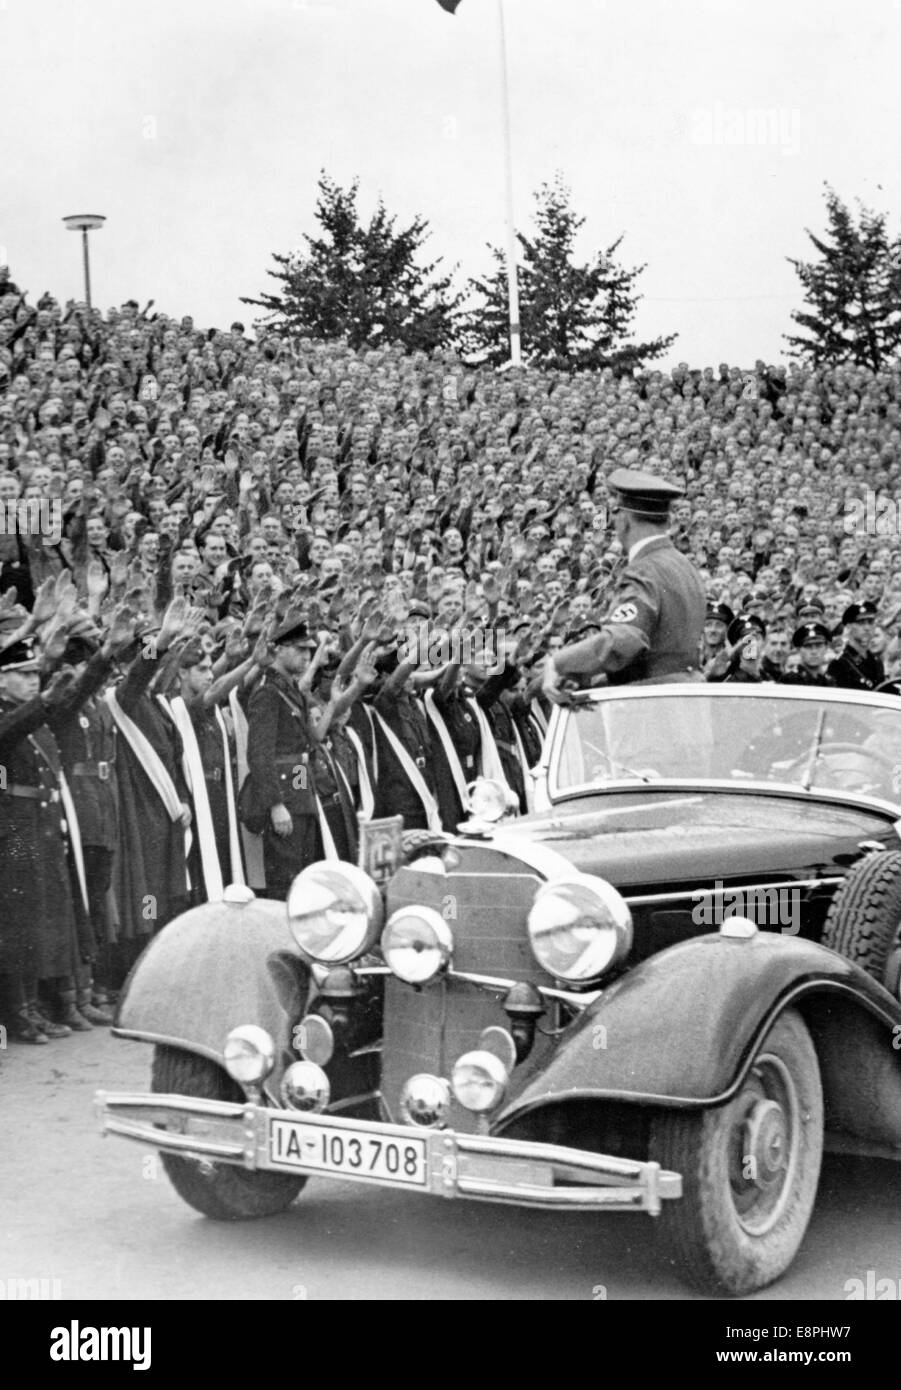 Nuremberg Rally 1937 in Nuremberg, Germany - Nazi party rally grounds - Adolf Hitler leaves the stadium of the Hitler Youth after the end of the roll call of the Hitler Youth (HJ). (Flaws in quality due to the historic picture copy) Fotoarchiv für Zeitgeschichtee - NO WIRE SERVICE - Stock Photo